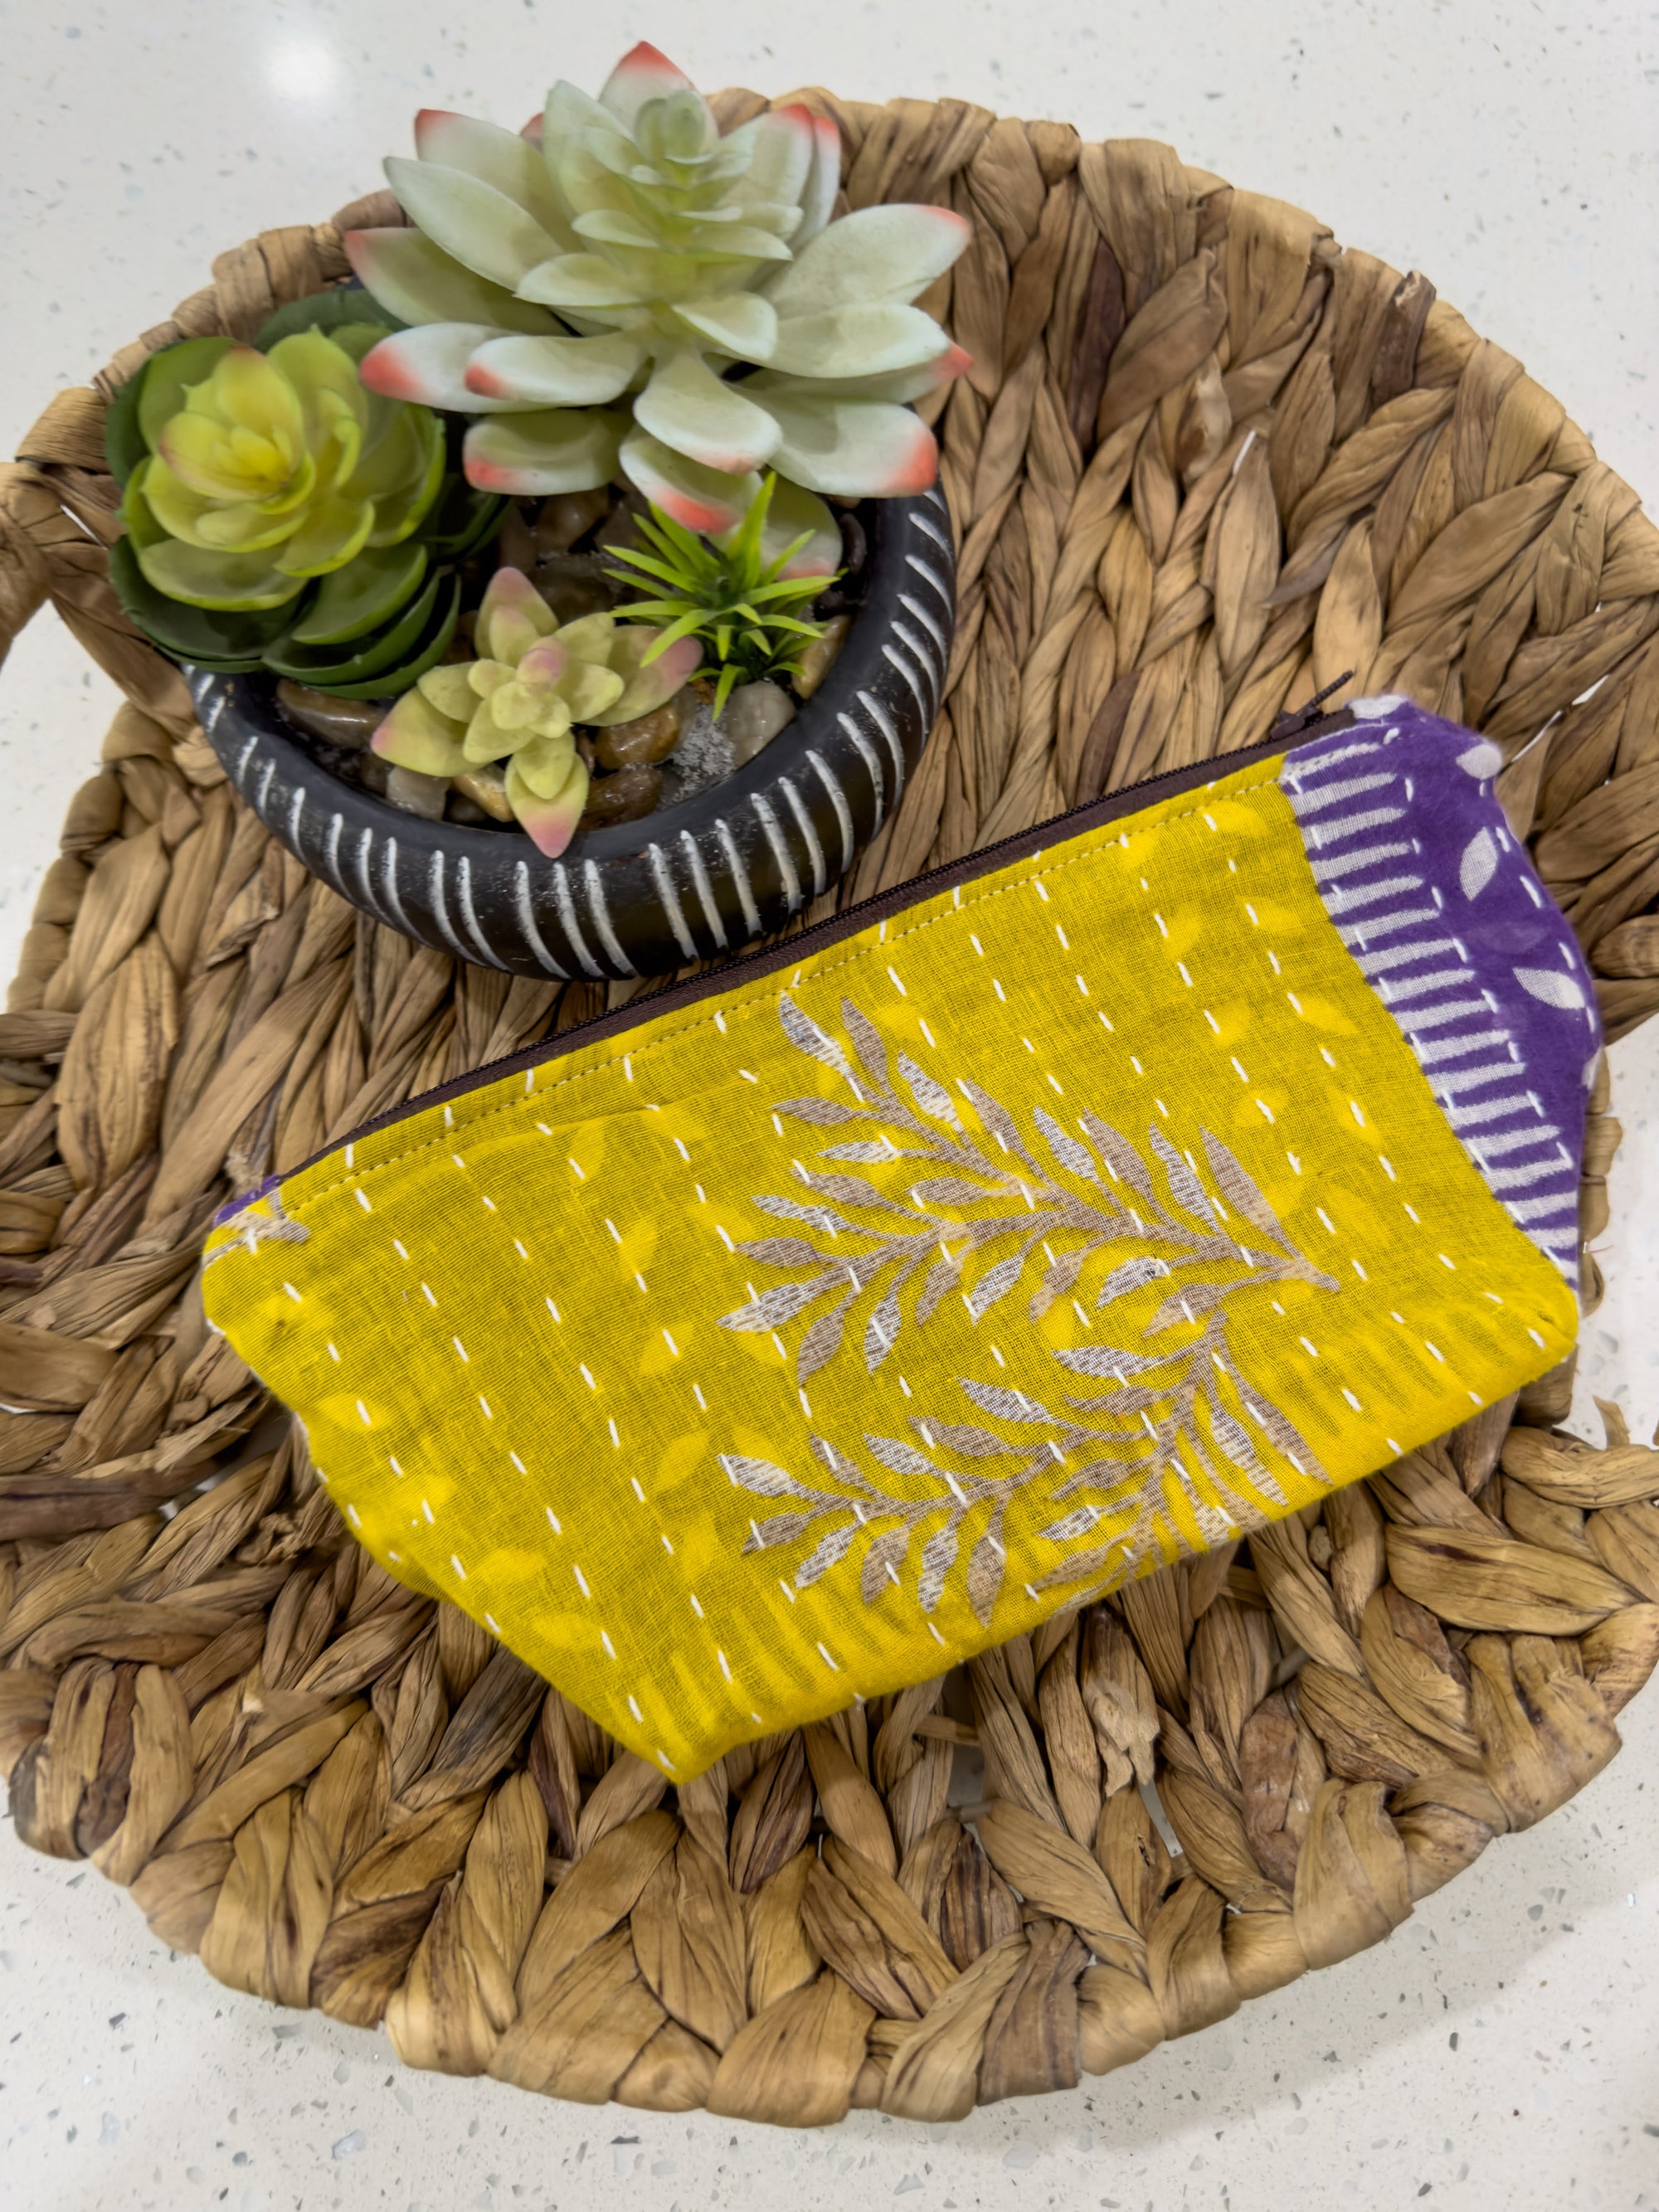 a yellow purse sitting on top of a woven basket